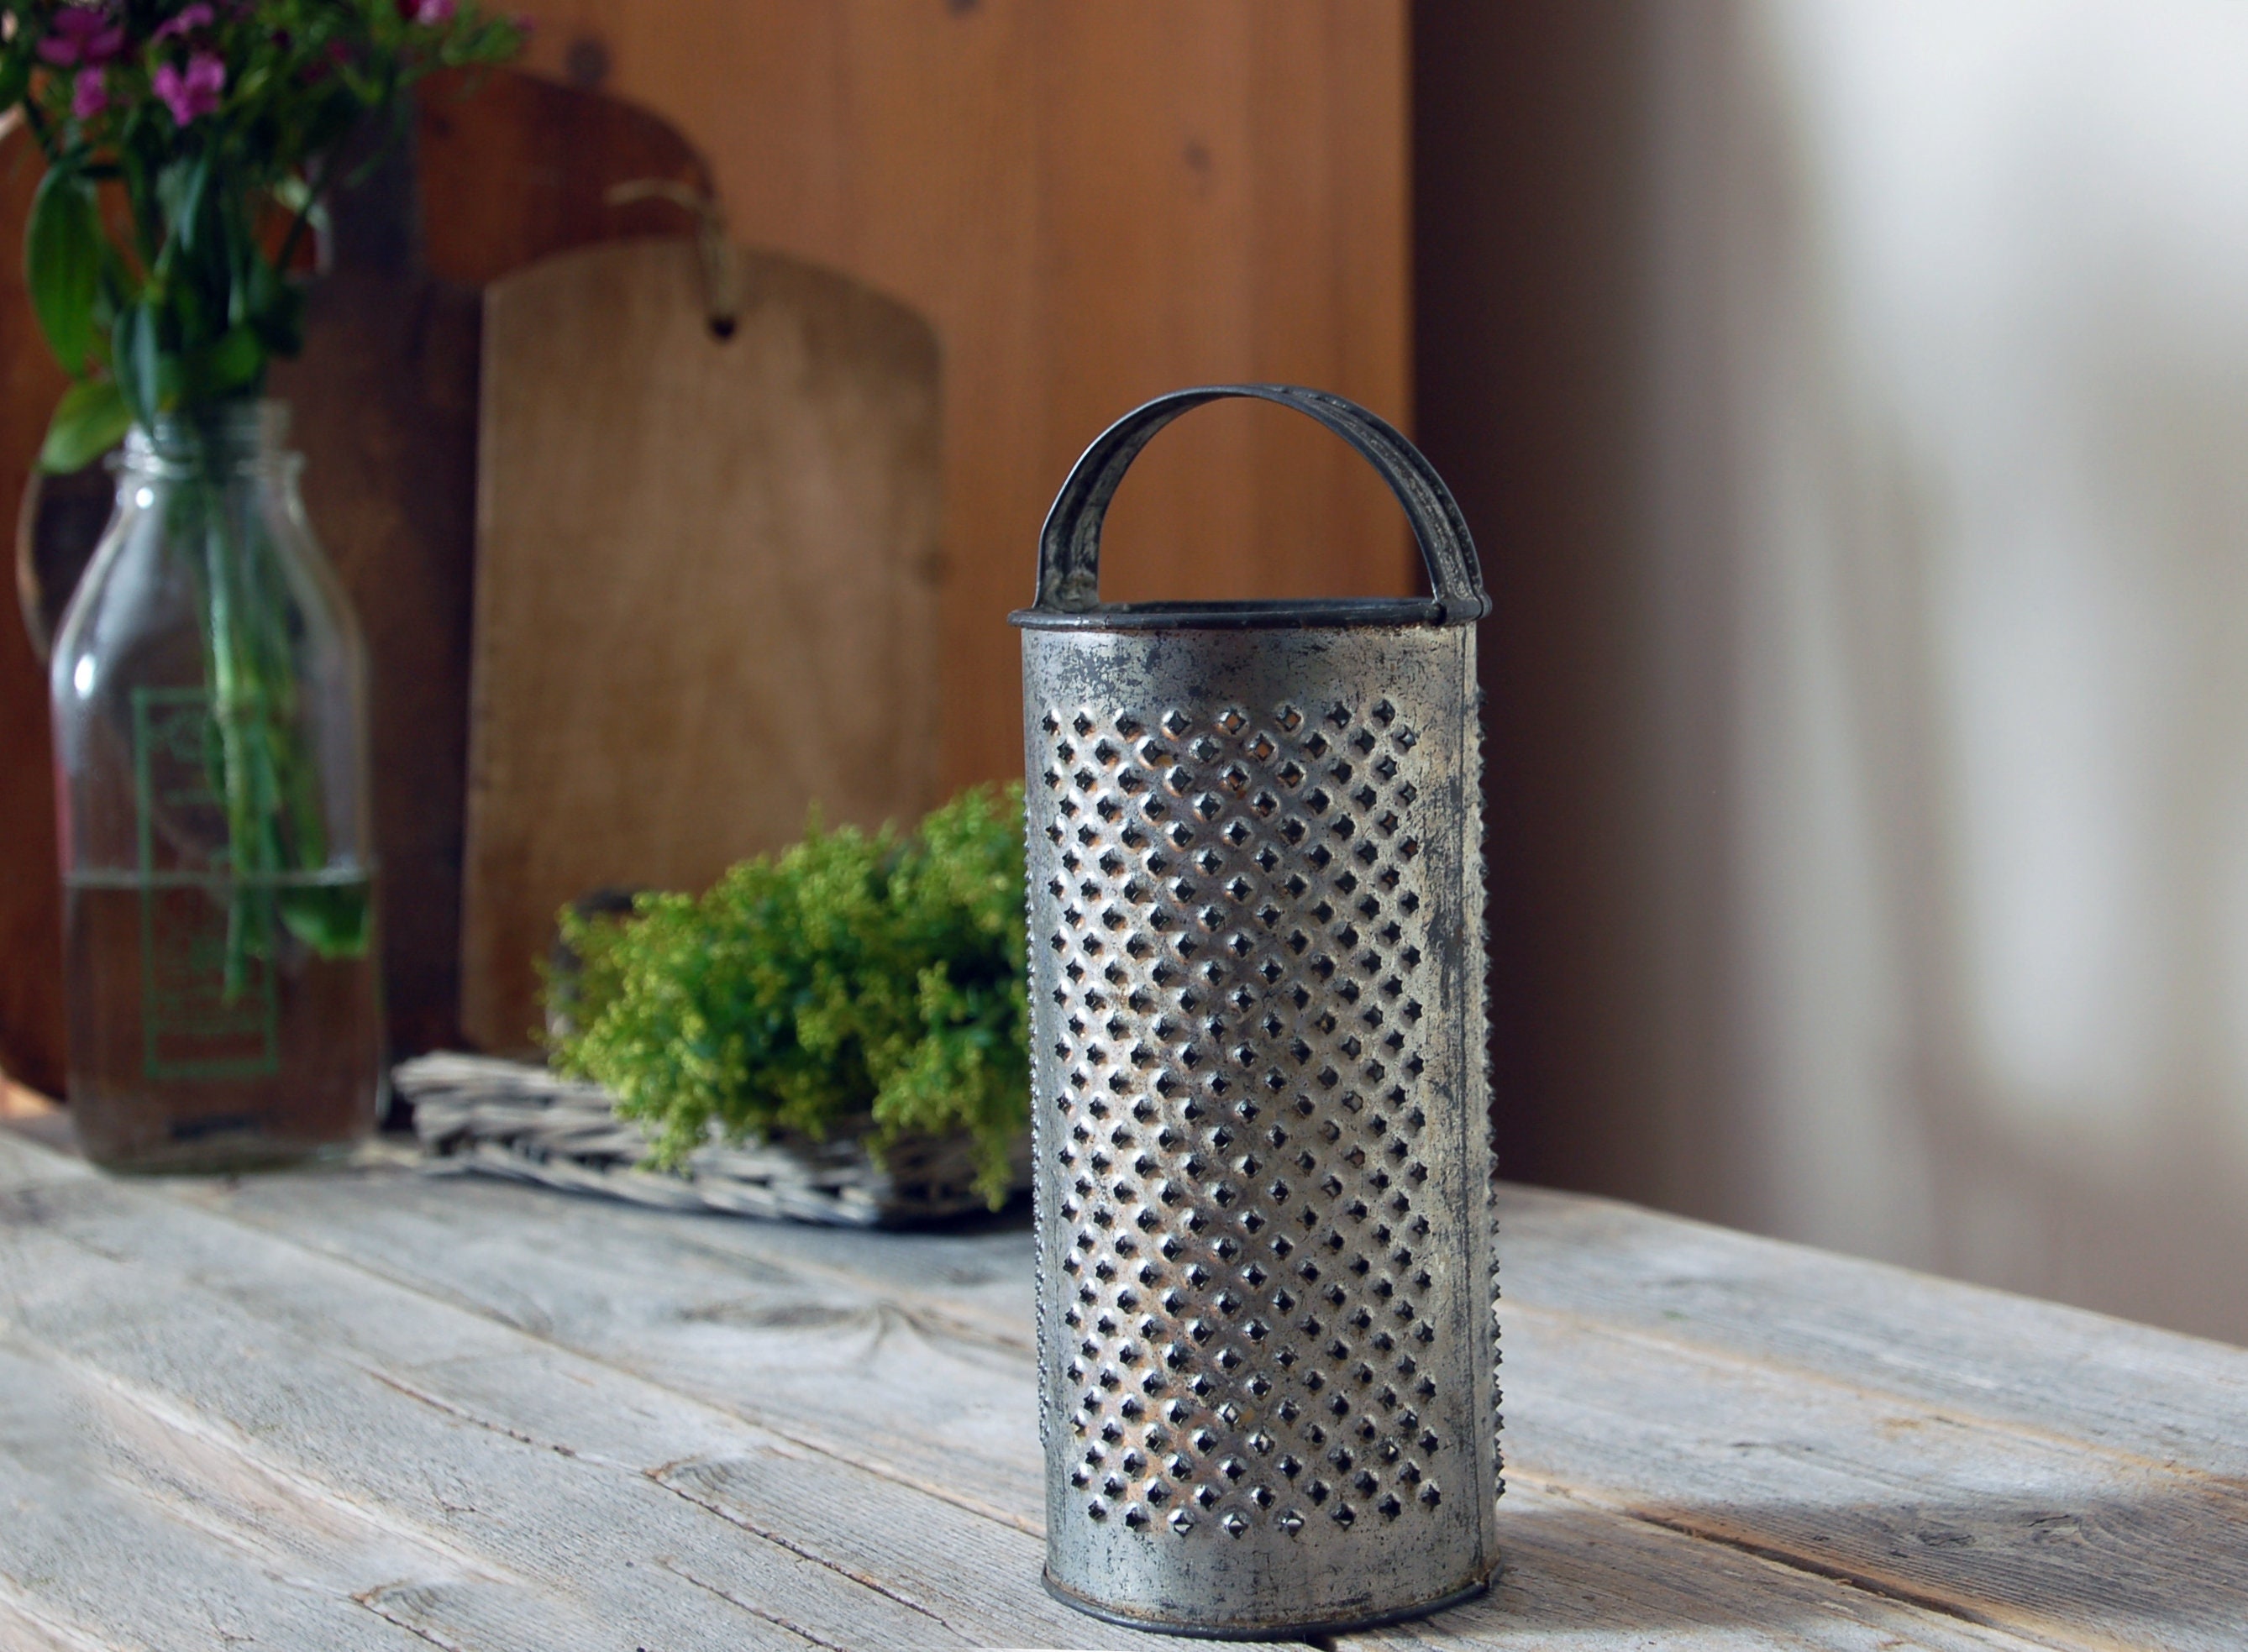 VINTAGE 3 in 1 Cheese Grater 